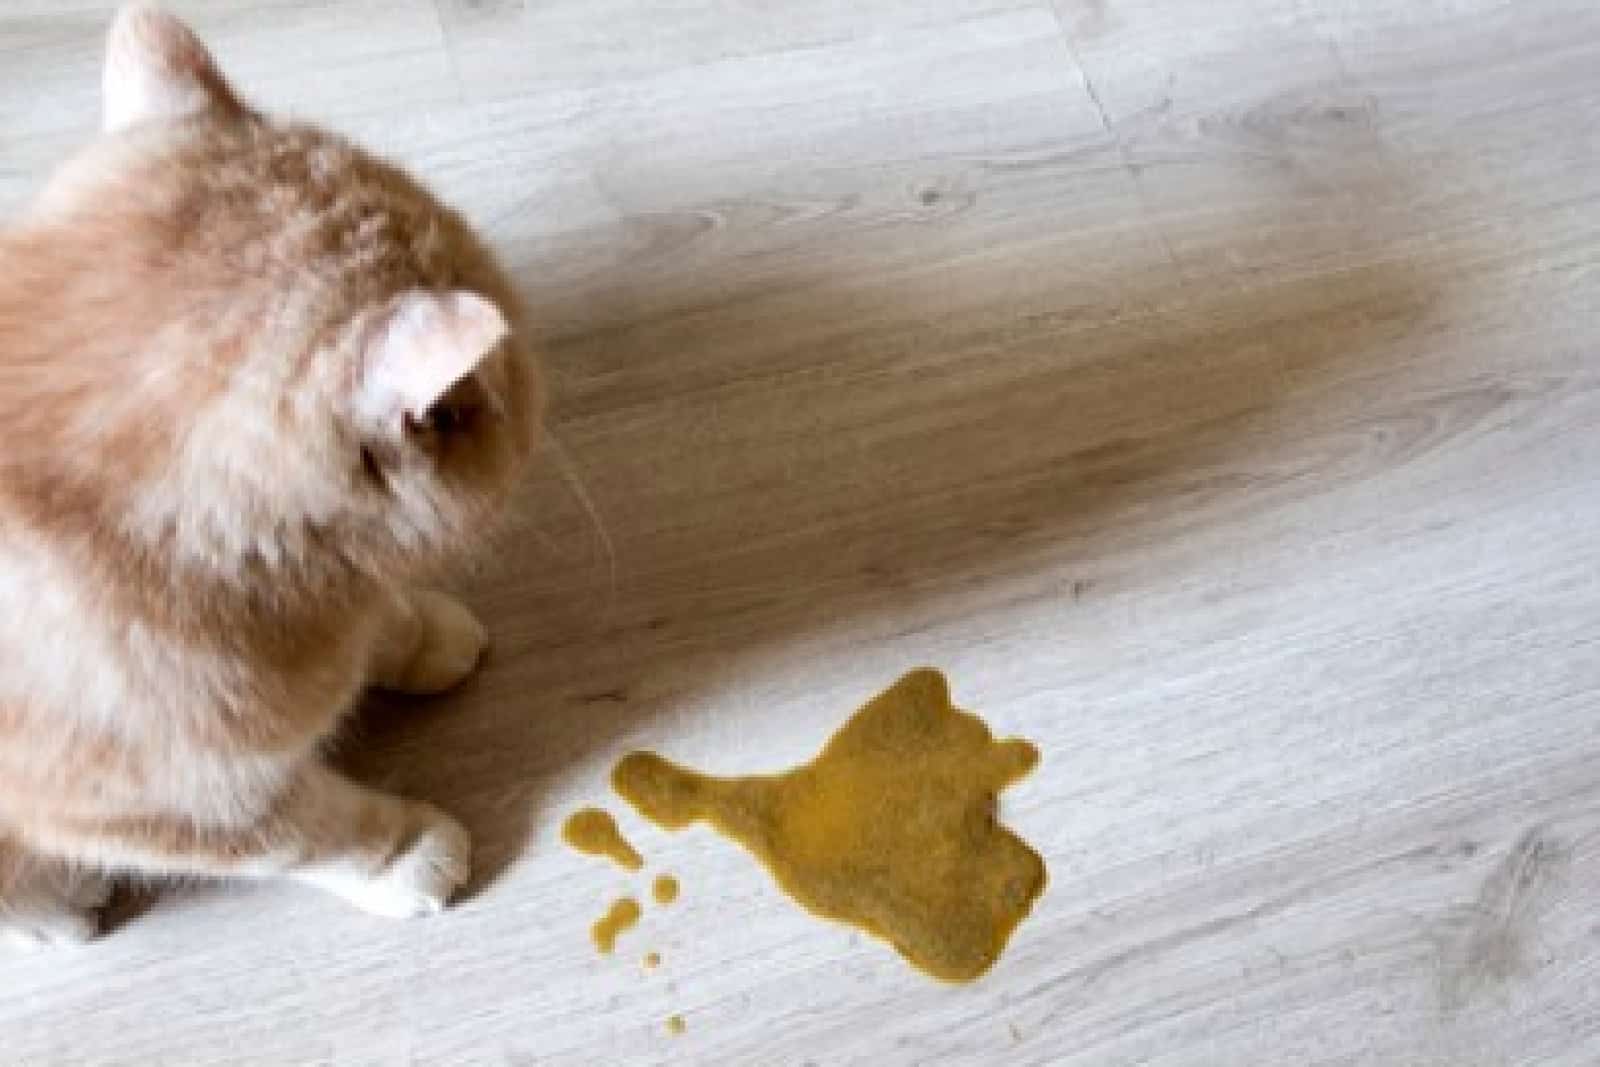 photo of a cat after vomiting on floor